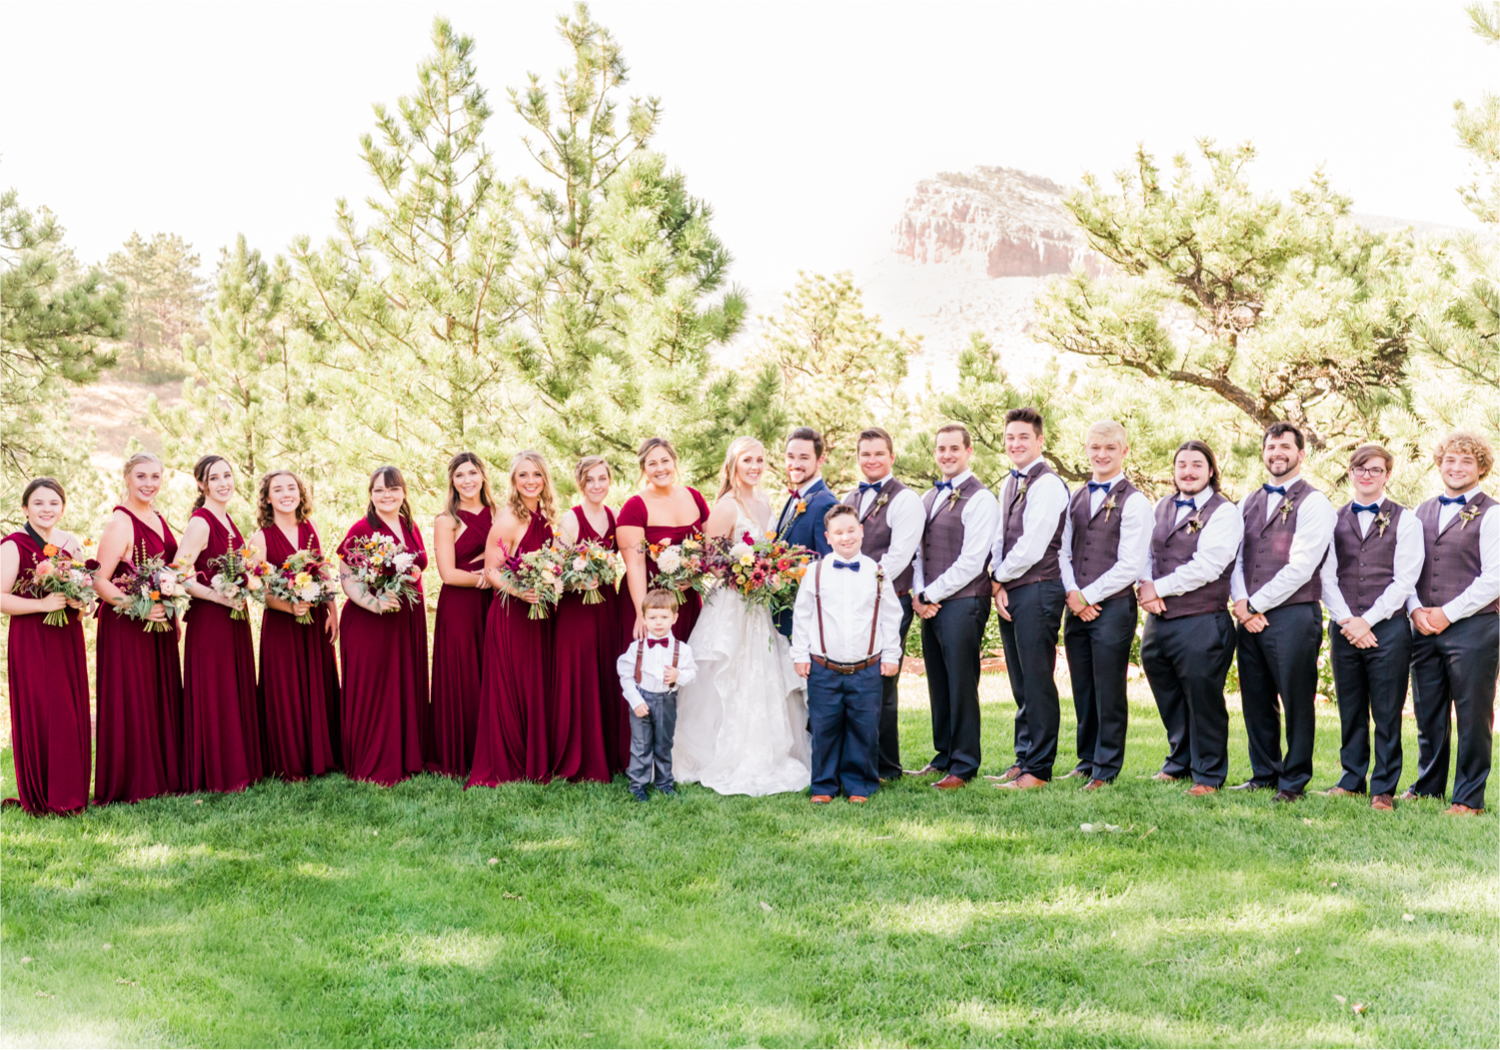 Romantic Whimsical Wedding at the Lionscrest Manor in Lyons, CO | Britni Girard Photography - Wedding Photo and Video Team | Rustic Fall Decor mixed in Burgundy, Blush, Gold and Sage | Large Bridal Party | Groom Custom Suit from Jos. a Banks | Bride Wedding Dress Anna Be Bridal, Hailey Paige | Florals By Aflorae | 